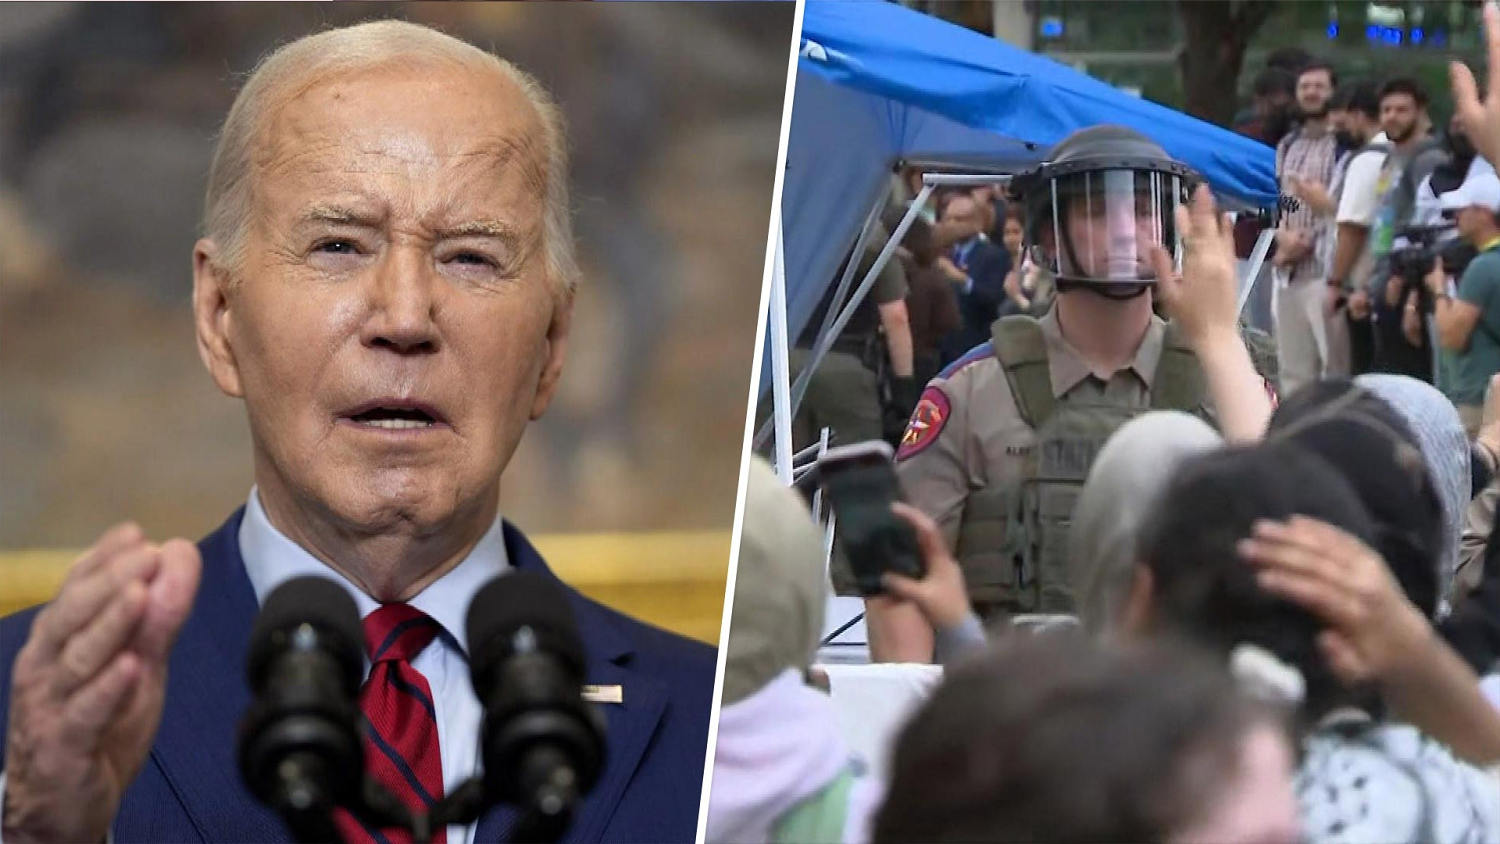 Biden weighs in on protests, line between free speech and chaos